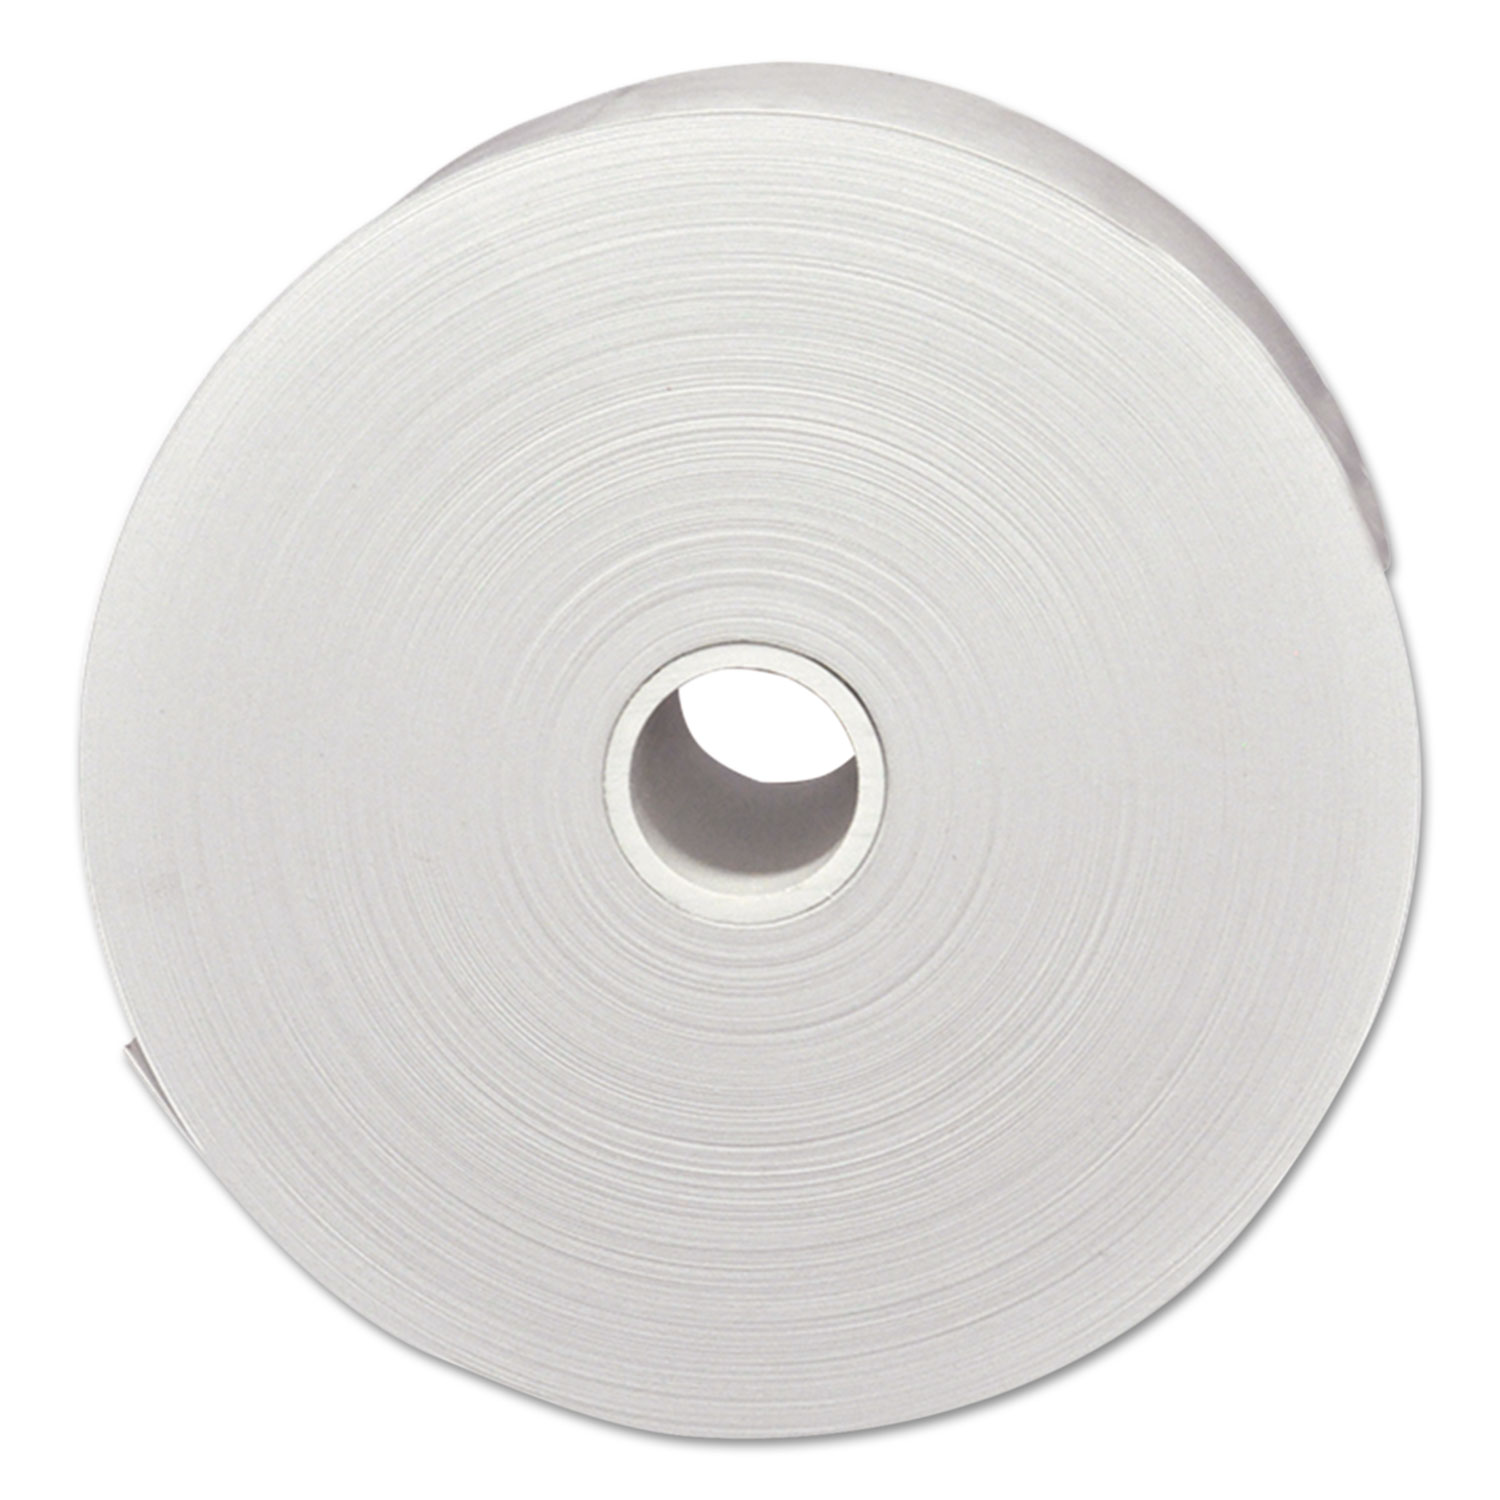 Direct Thermal Printing Thermal Paper Rolls, 3 1/8 x 815 ft, White, 8/Carton